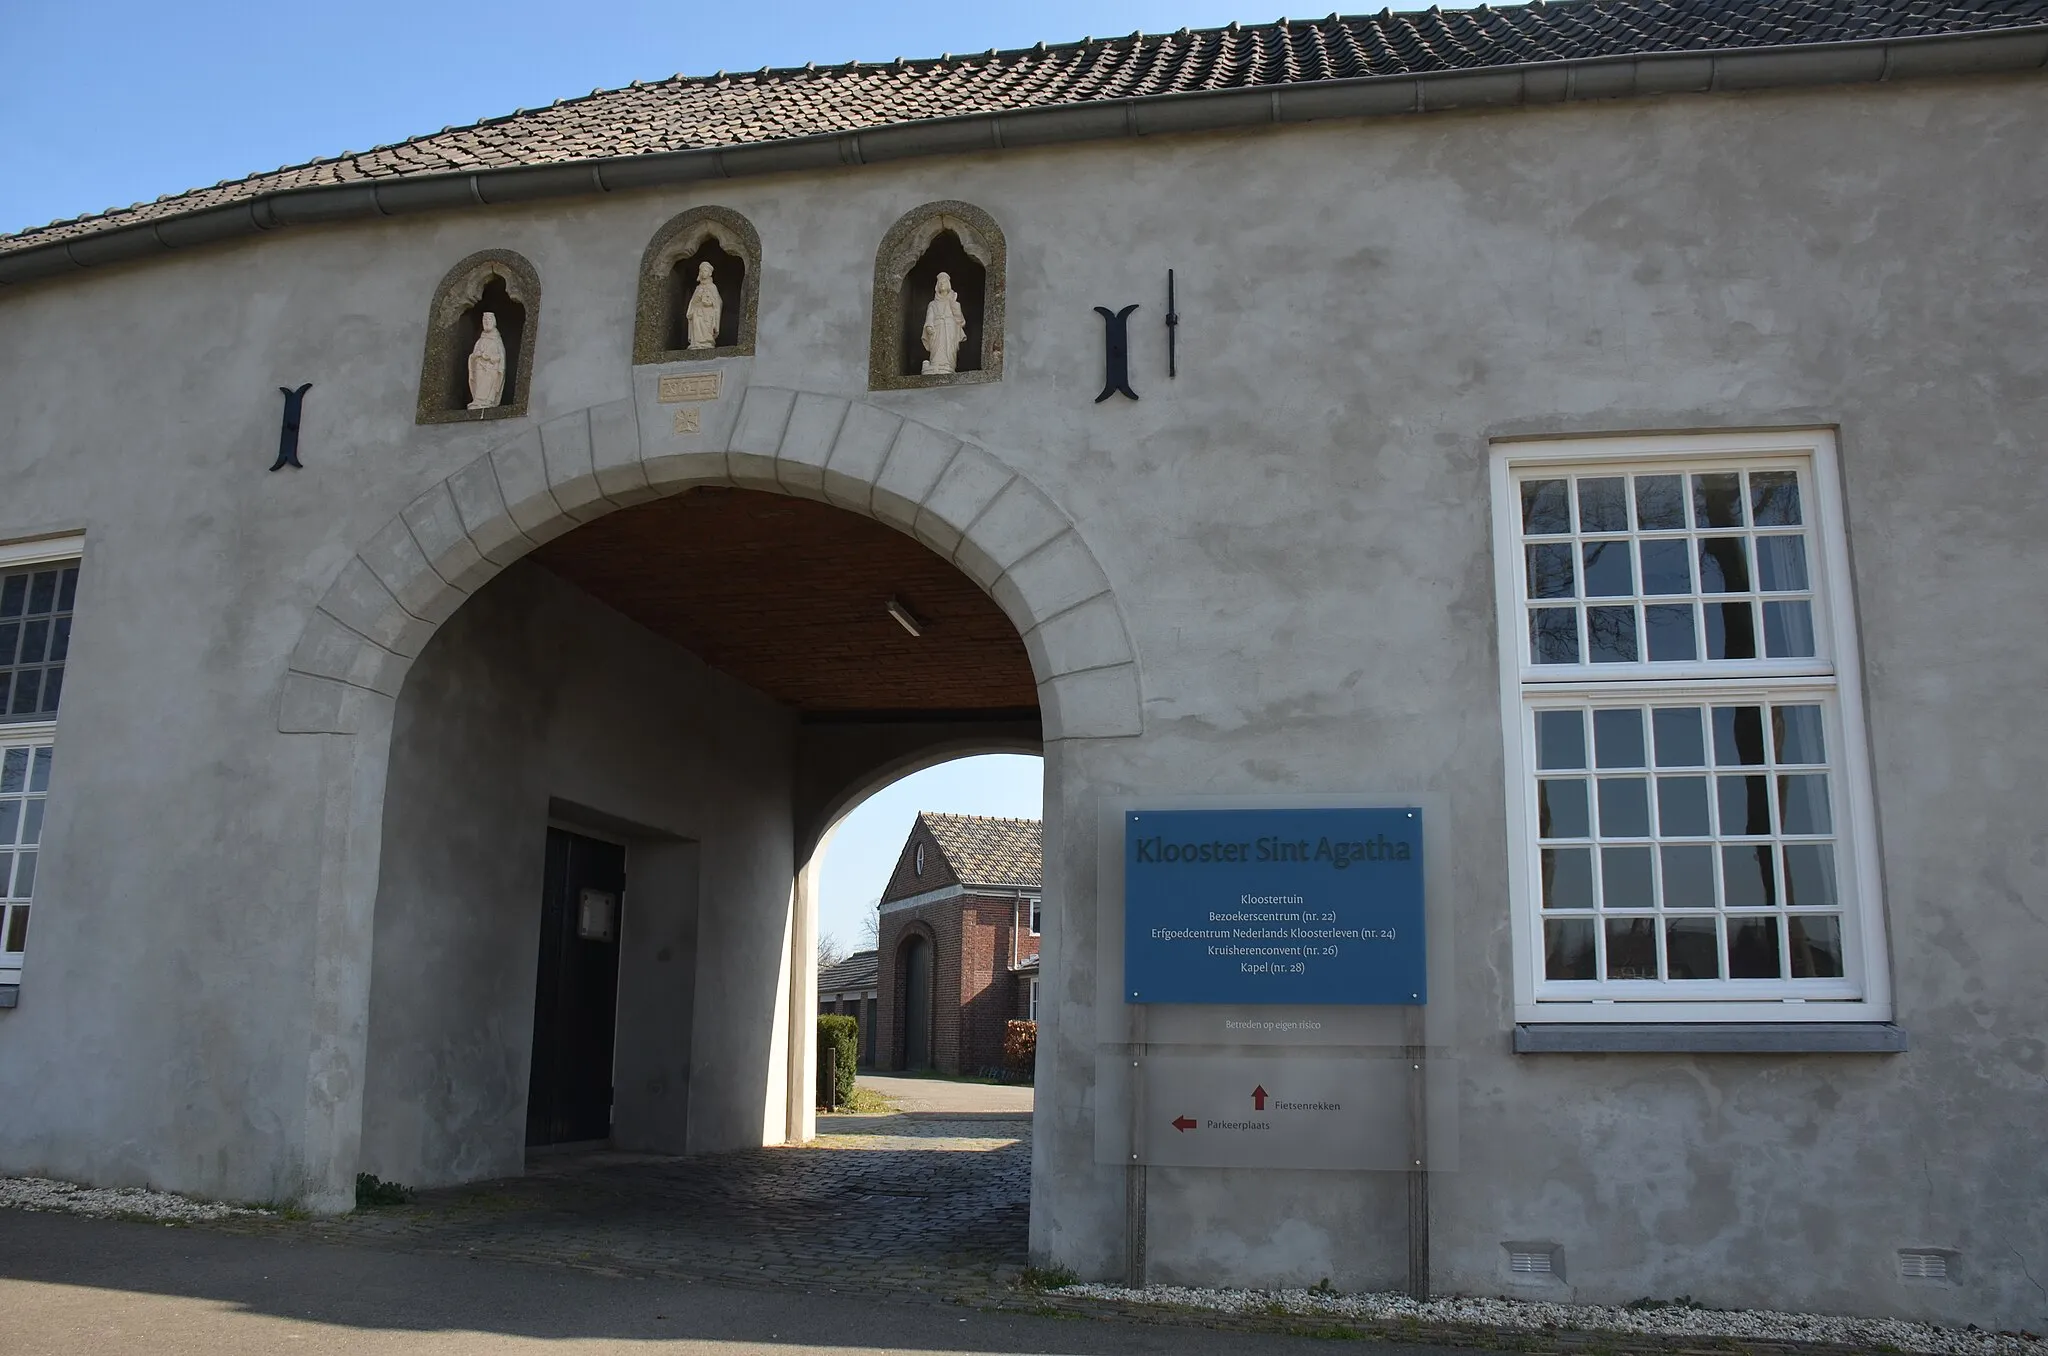 Photo showing: Entrance gate Monastry Klooster Sint Agatha